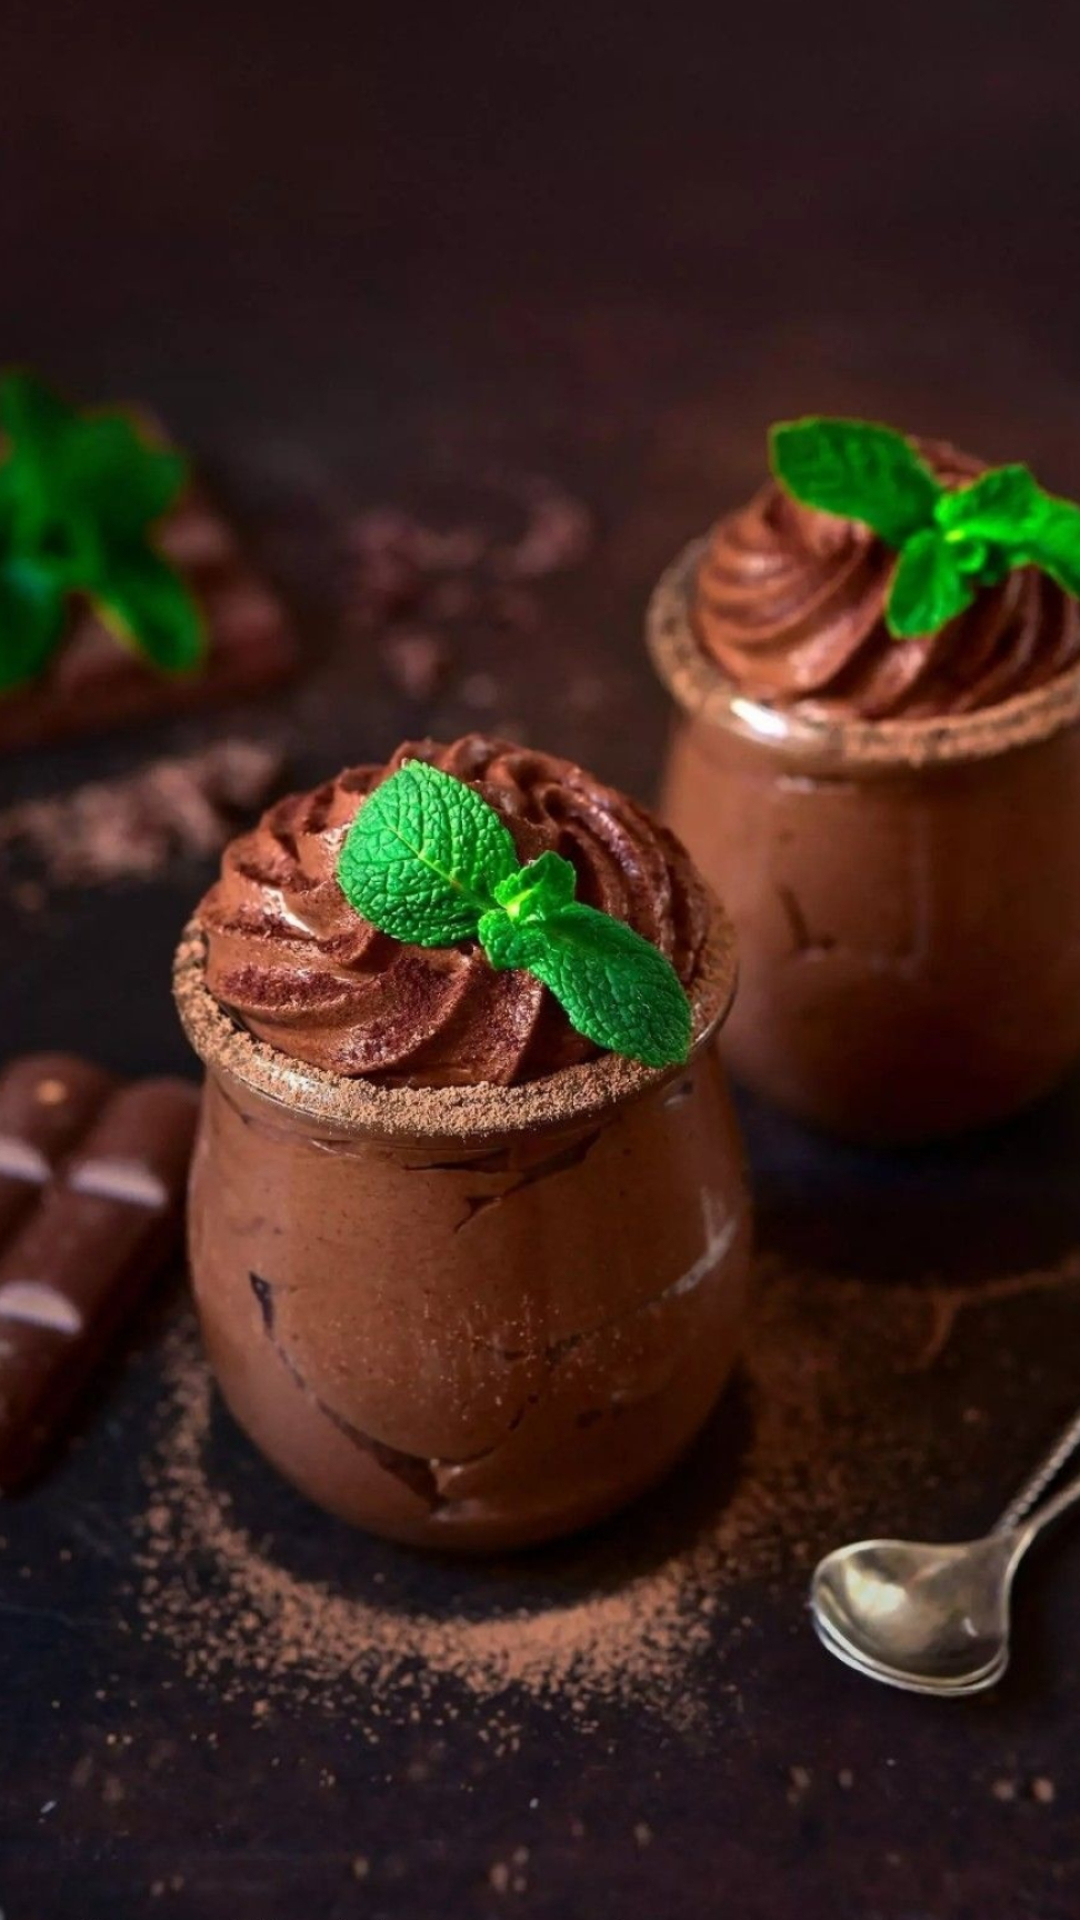 Decadent chocolate pudding, Mouthwatering delight, Irresistible cravings, Tempting dessert, 1080x1920 Full HD Handy